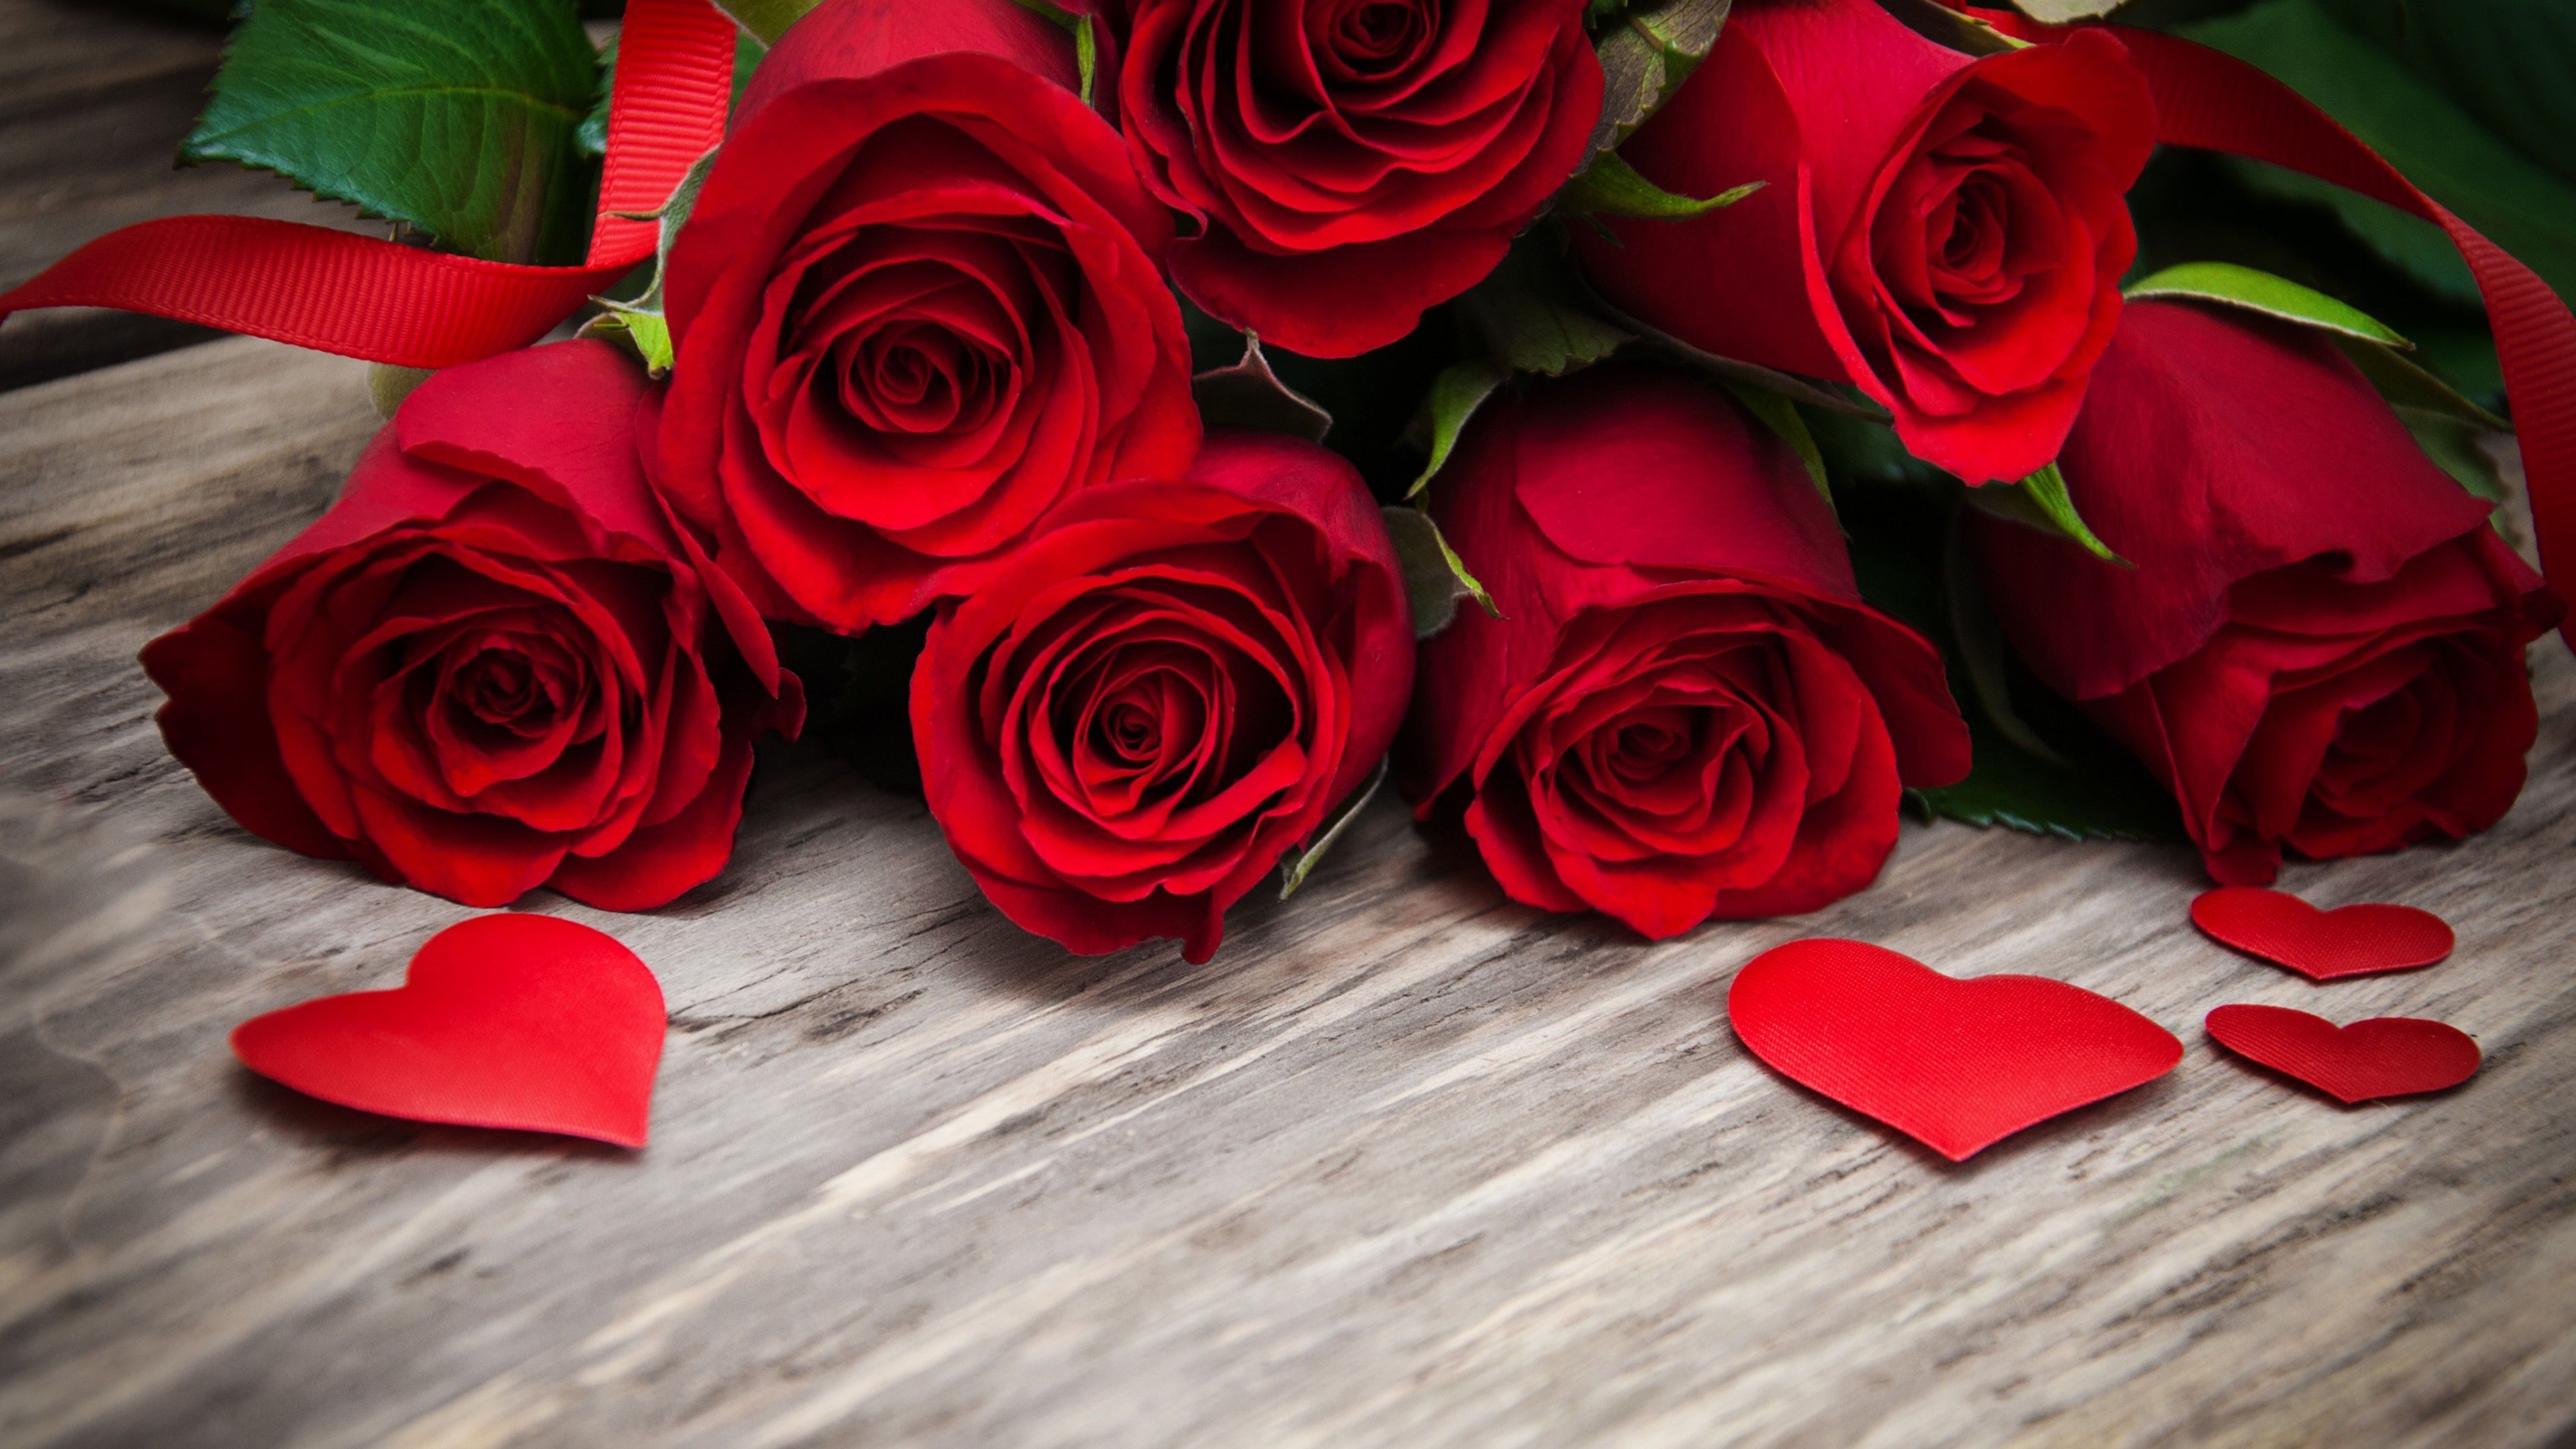 Valentine Flowers Wallpapers - Top Free Valentine Flowers Backgrounds 3840x2160